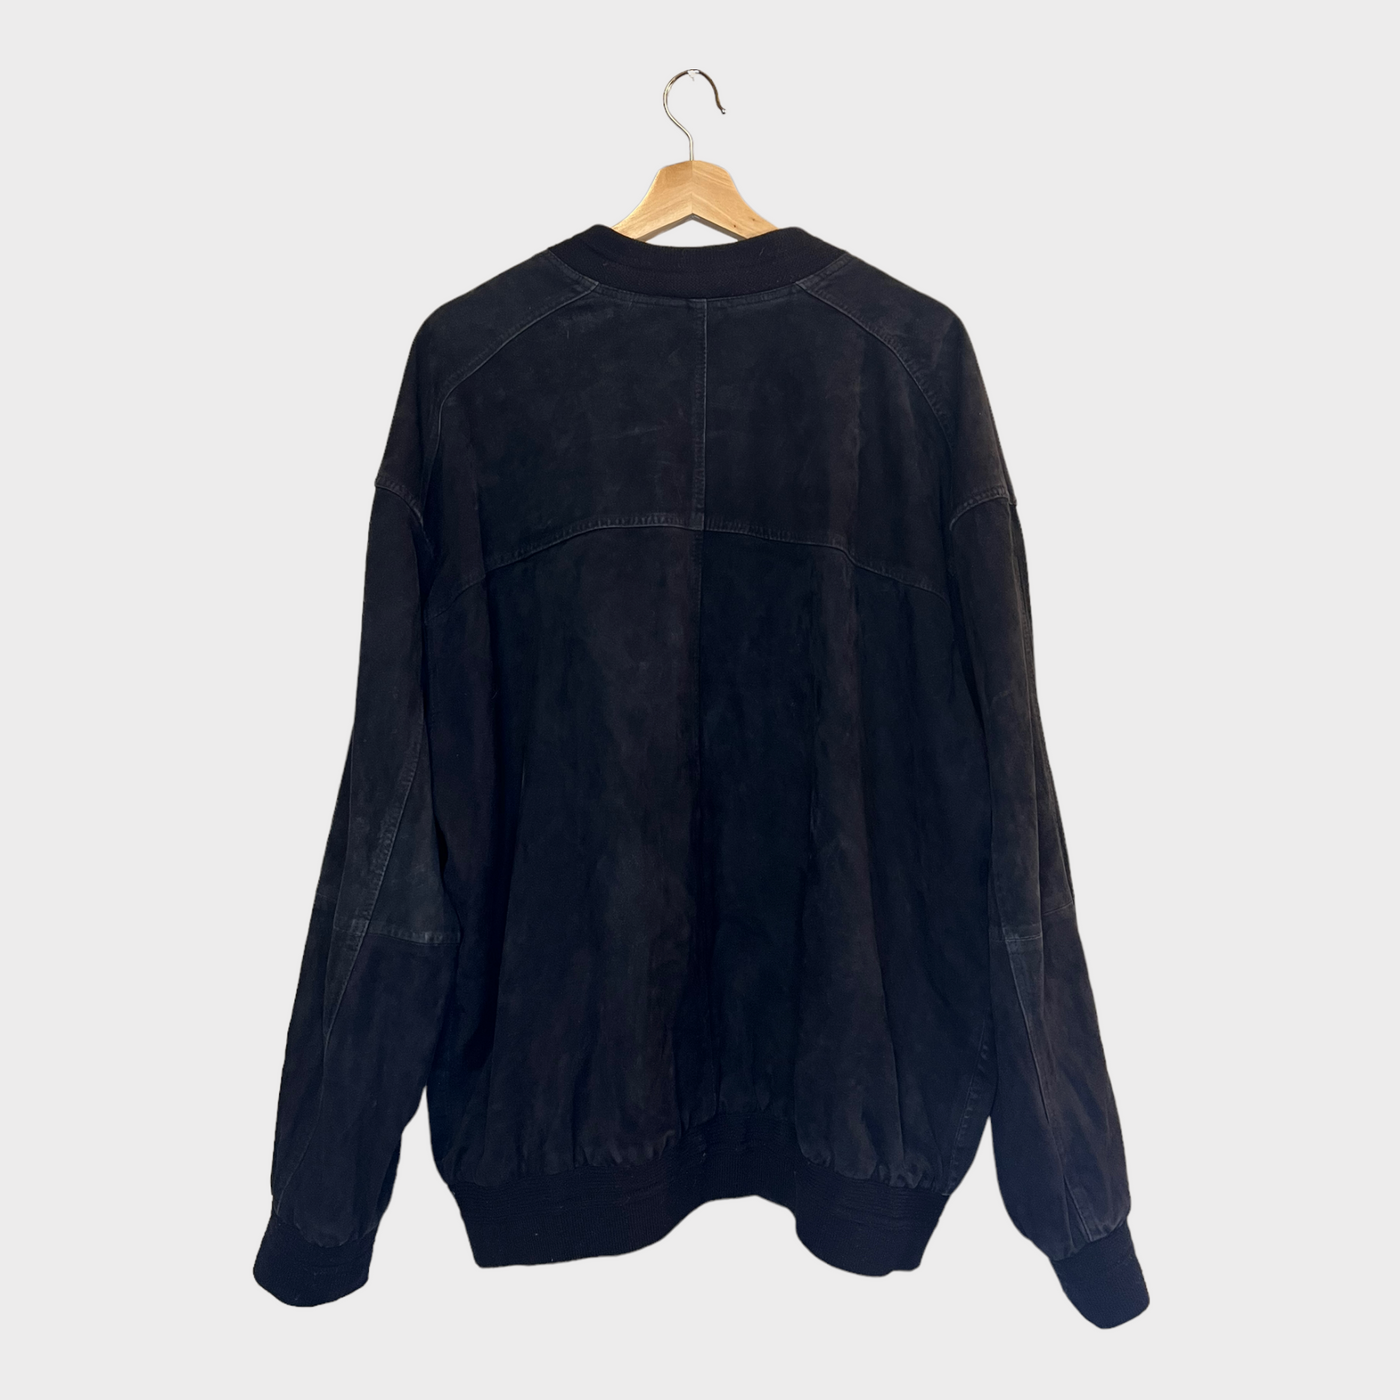 Suede jacket with a knitted collar in a black back